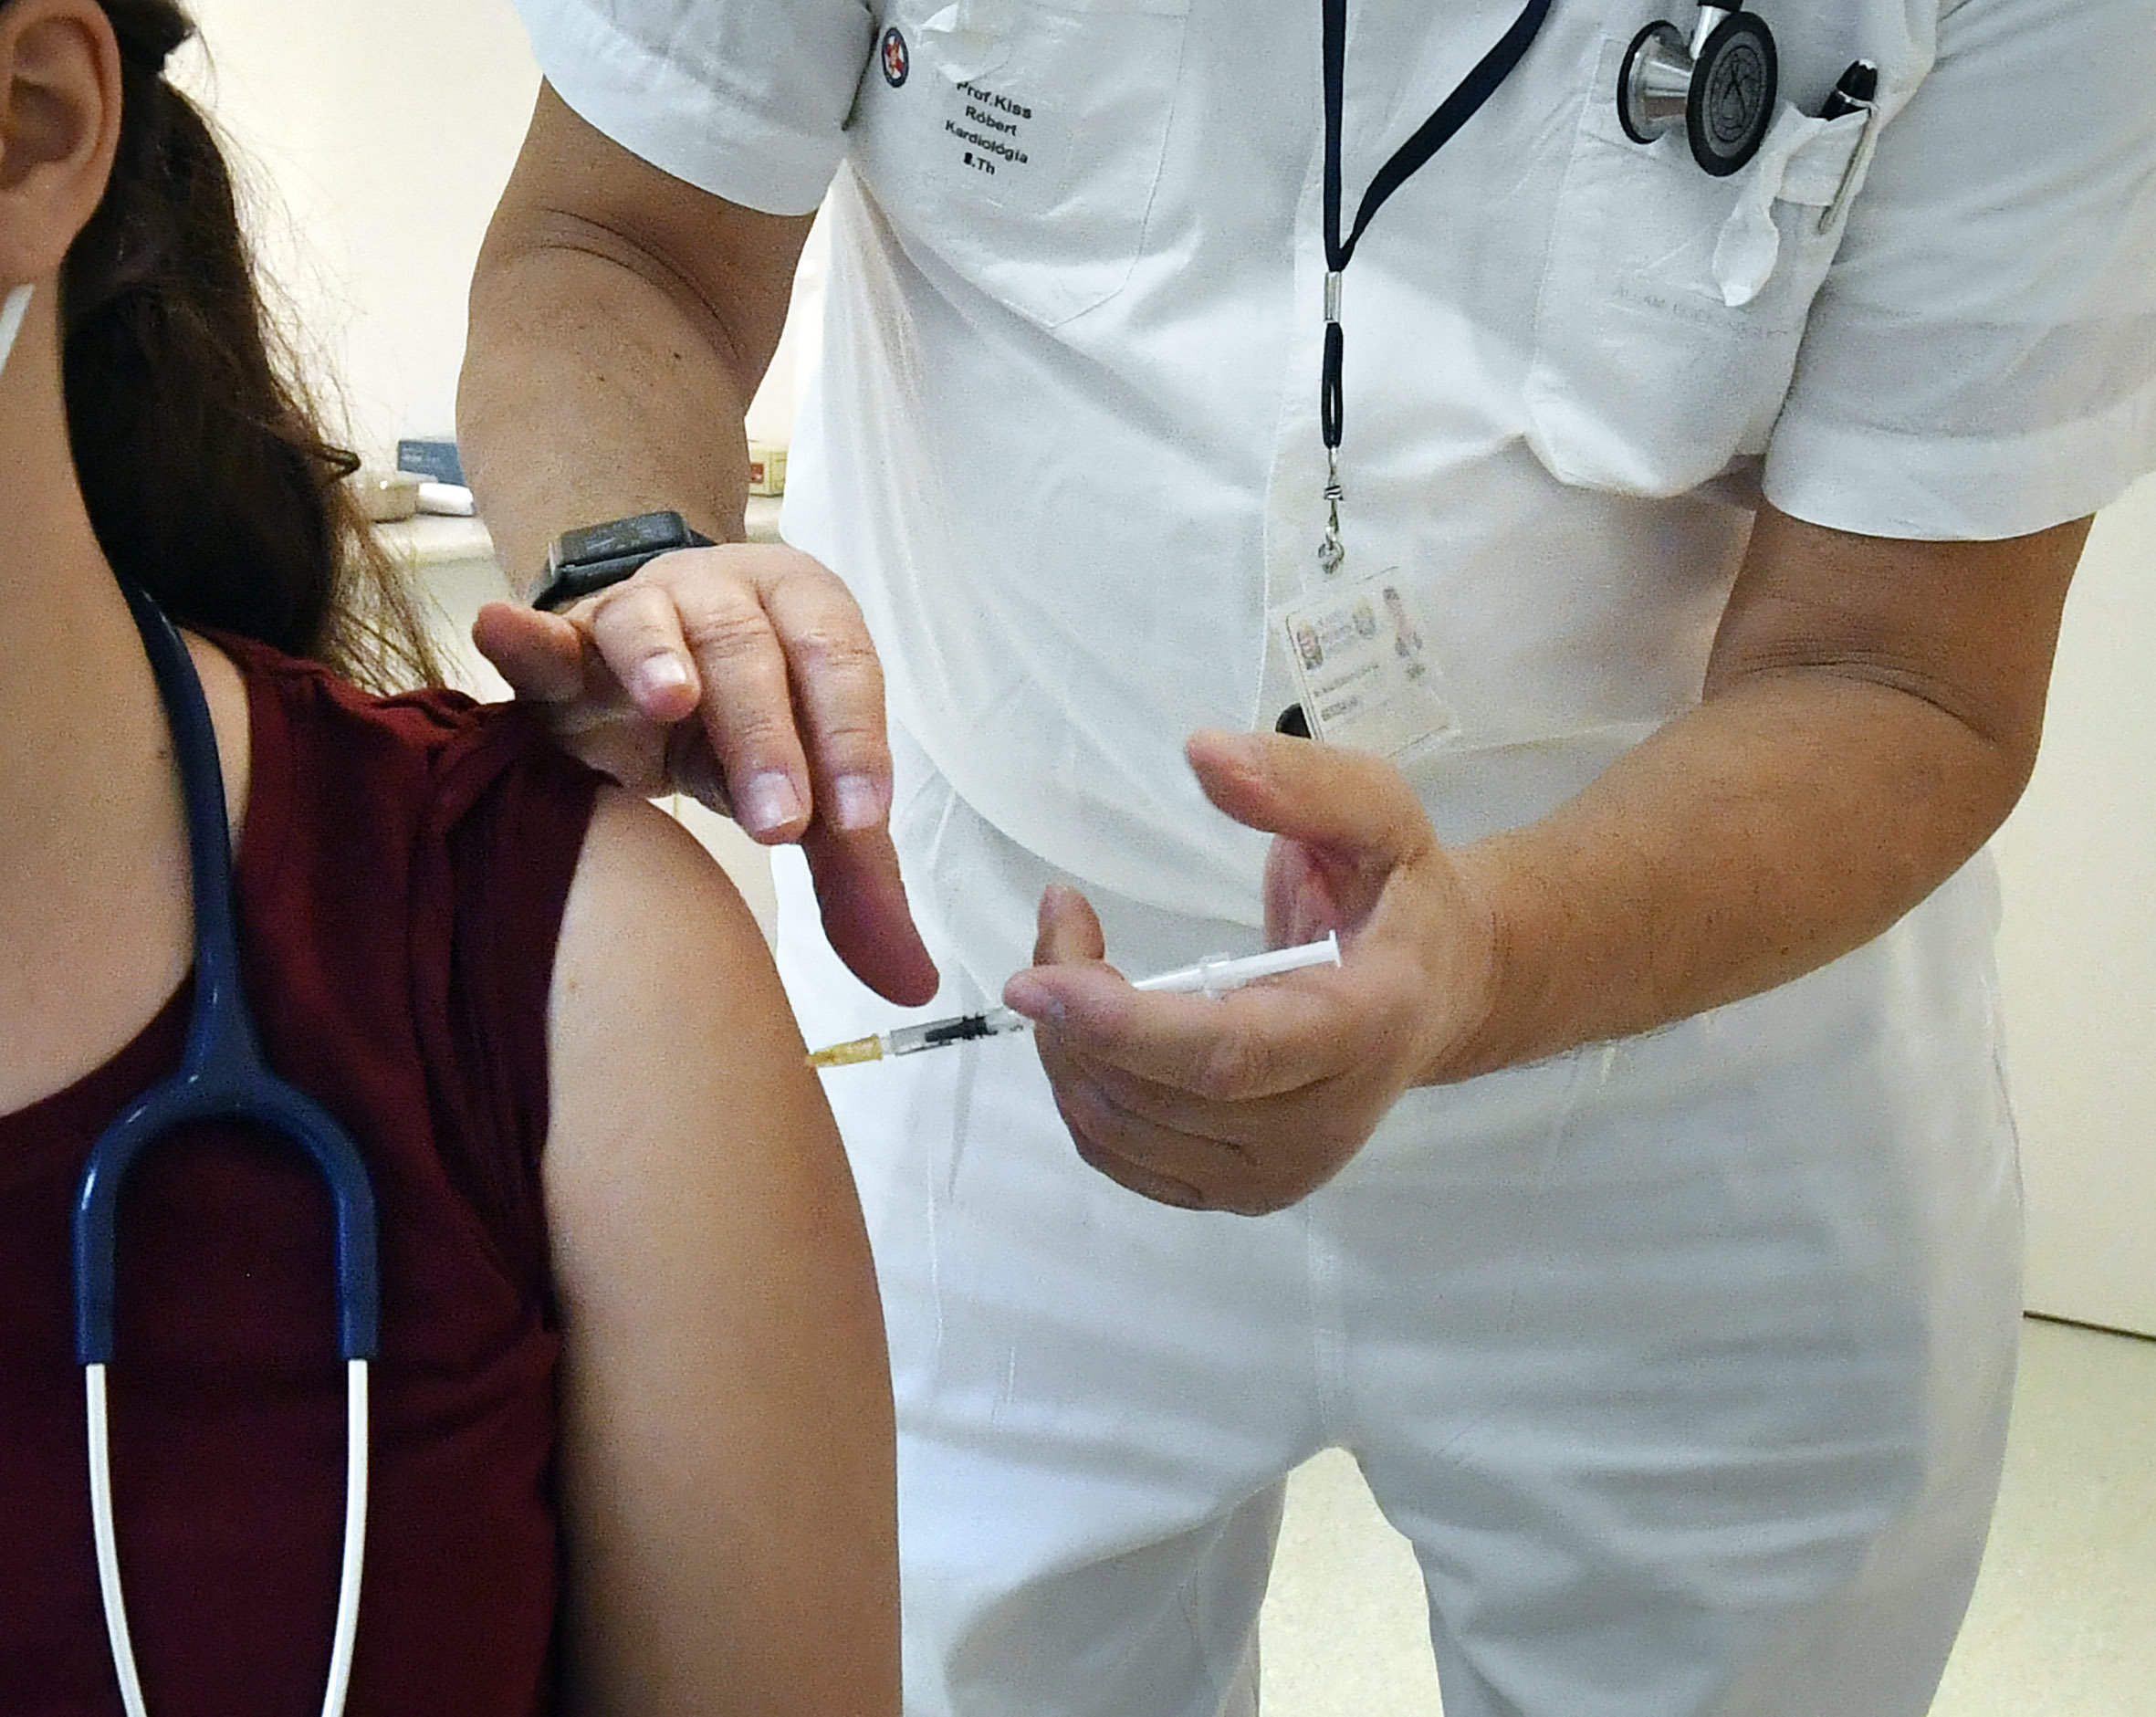 Many People in Hungary Cheating the System to Get Vaccinated